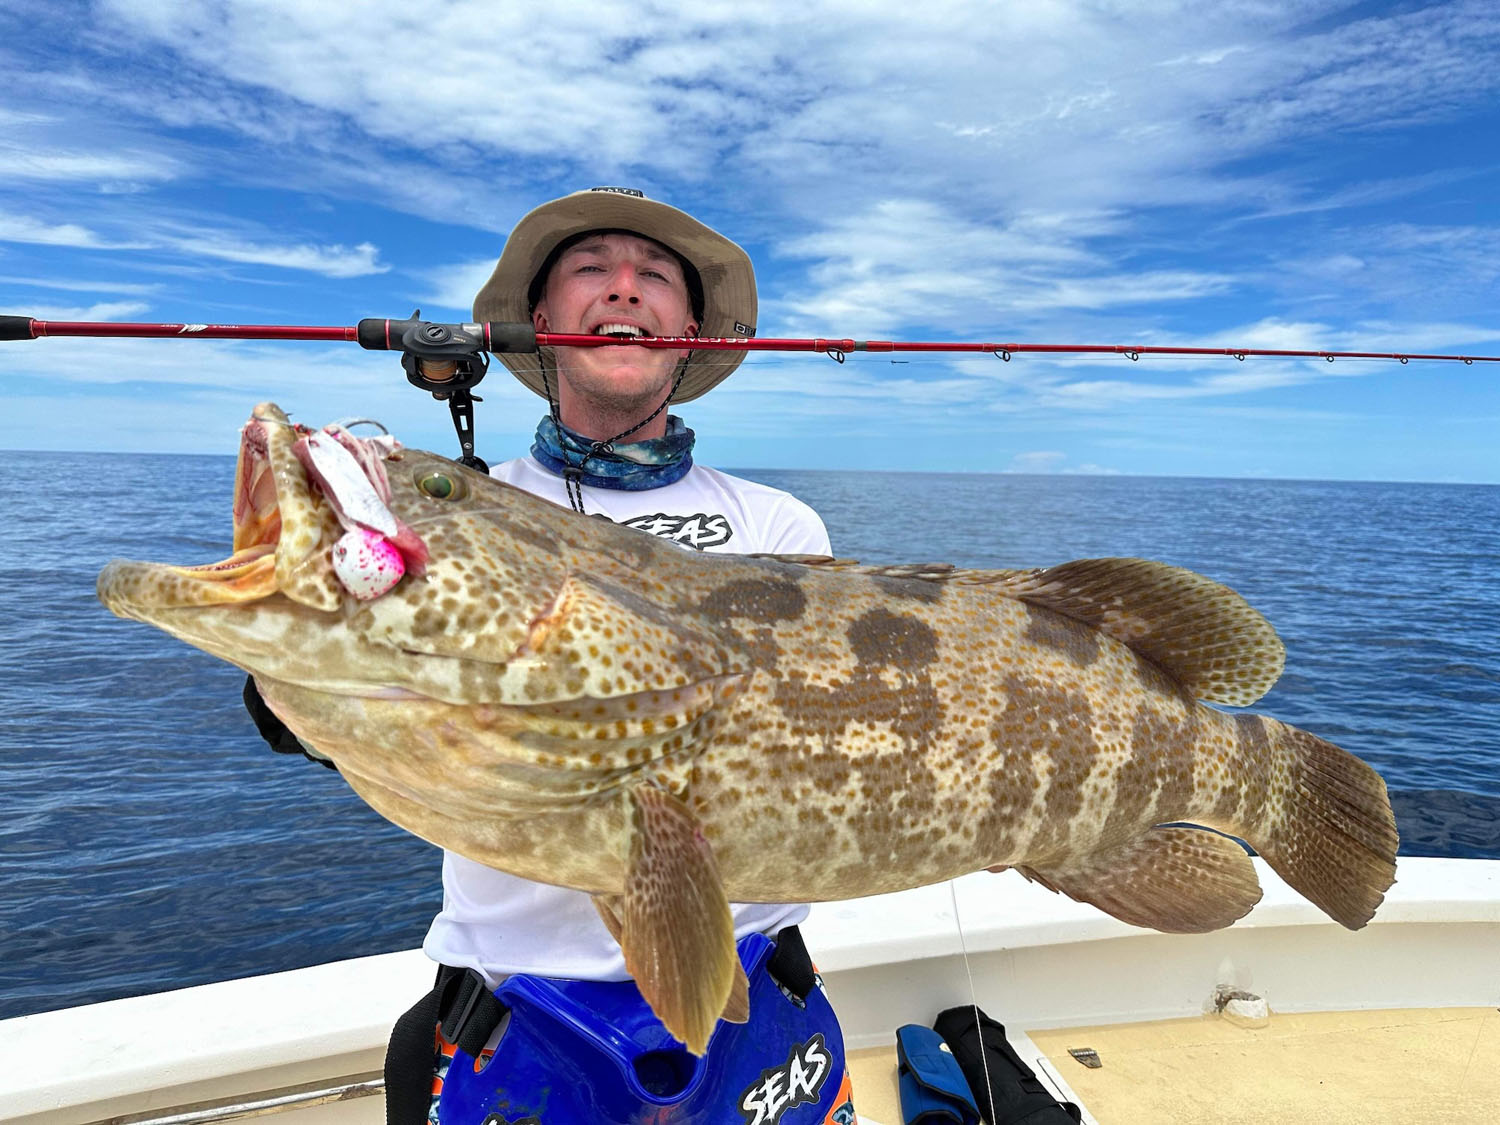 Oramnge Spotted Grouper caught in Madagascar on the Fish Nugz Bottom Tickler Kabura Jig